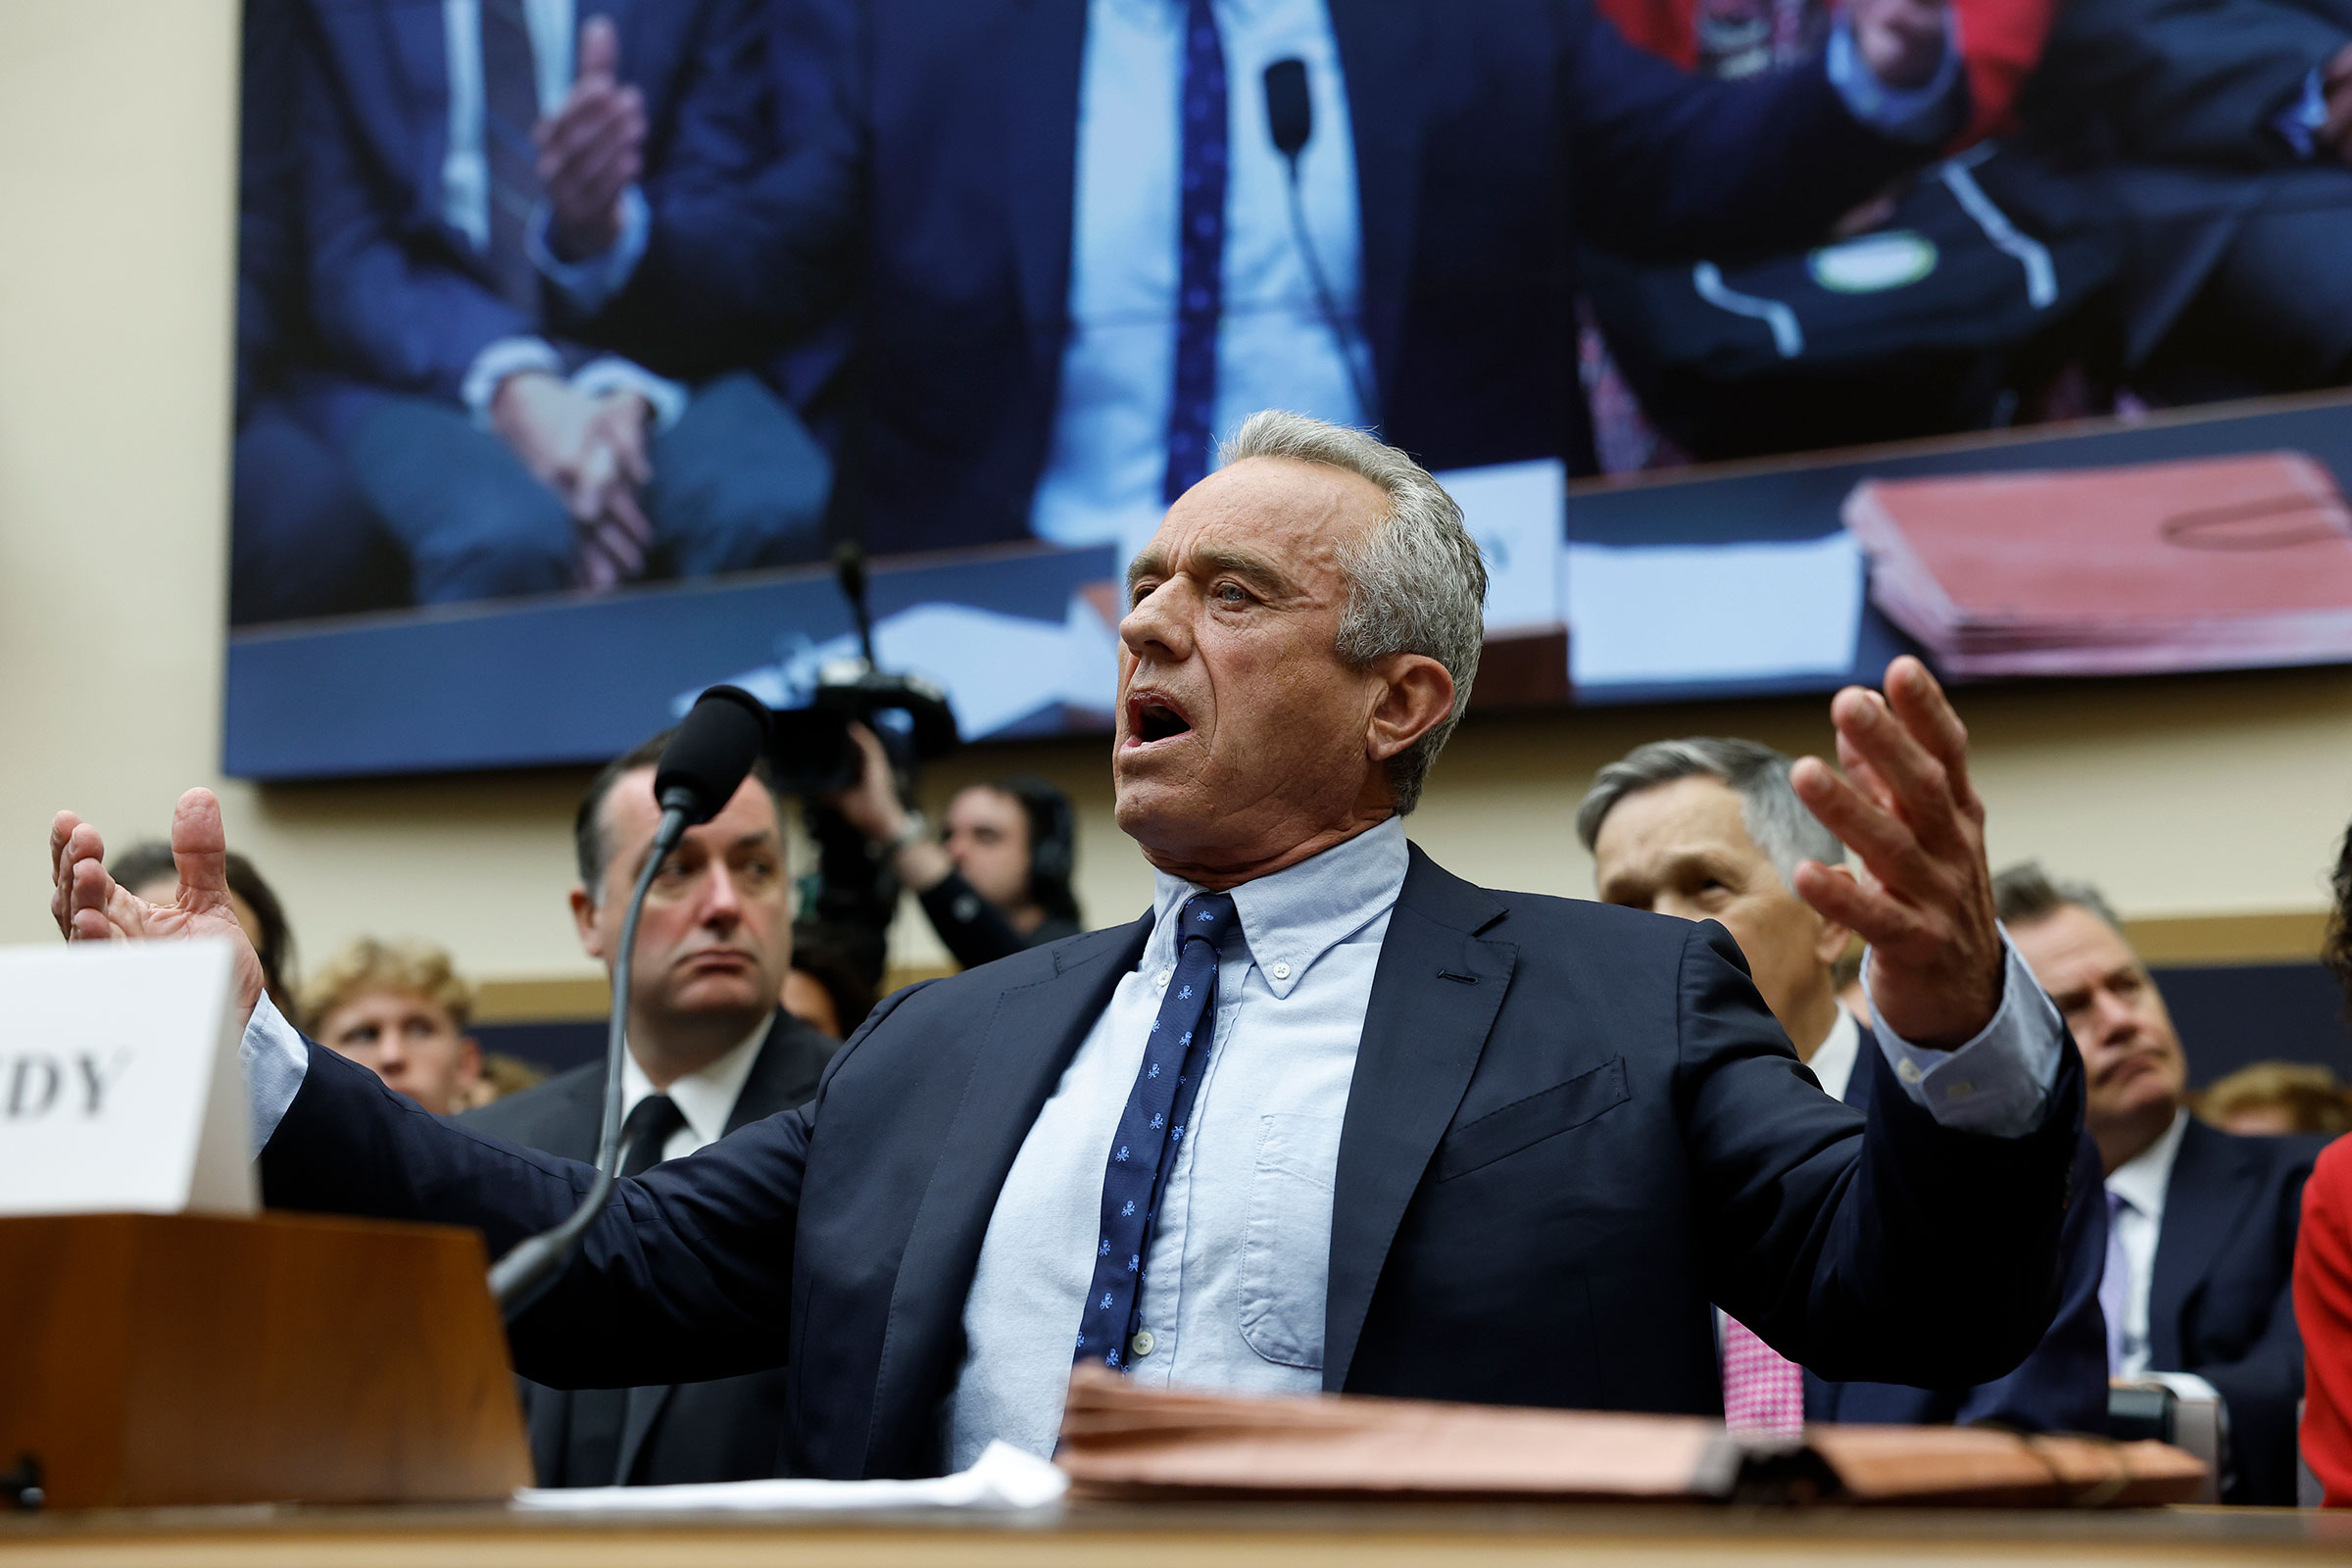 Robert F. Kennedy Jr. gestures his arms out as he speaks into a microphone during testimony at a House Judiciary Subcommittee meeting